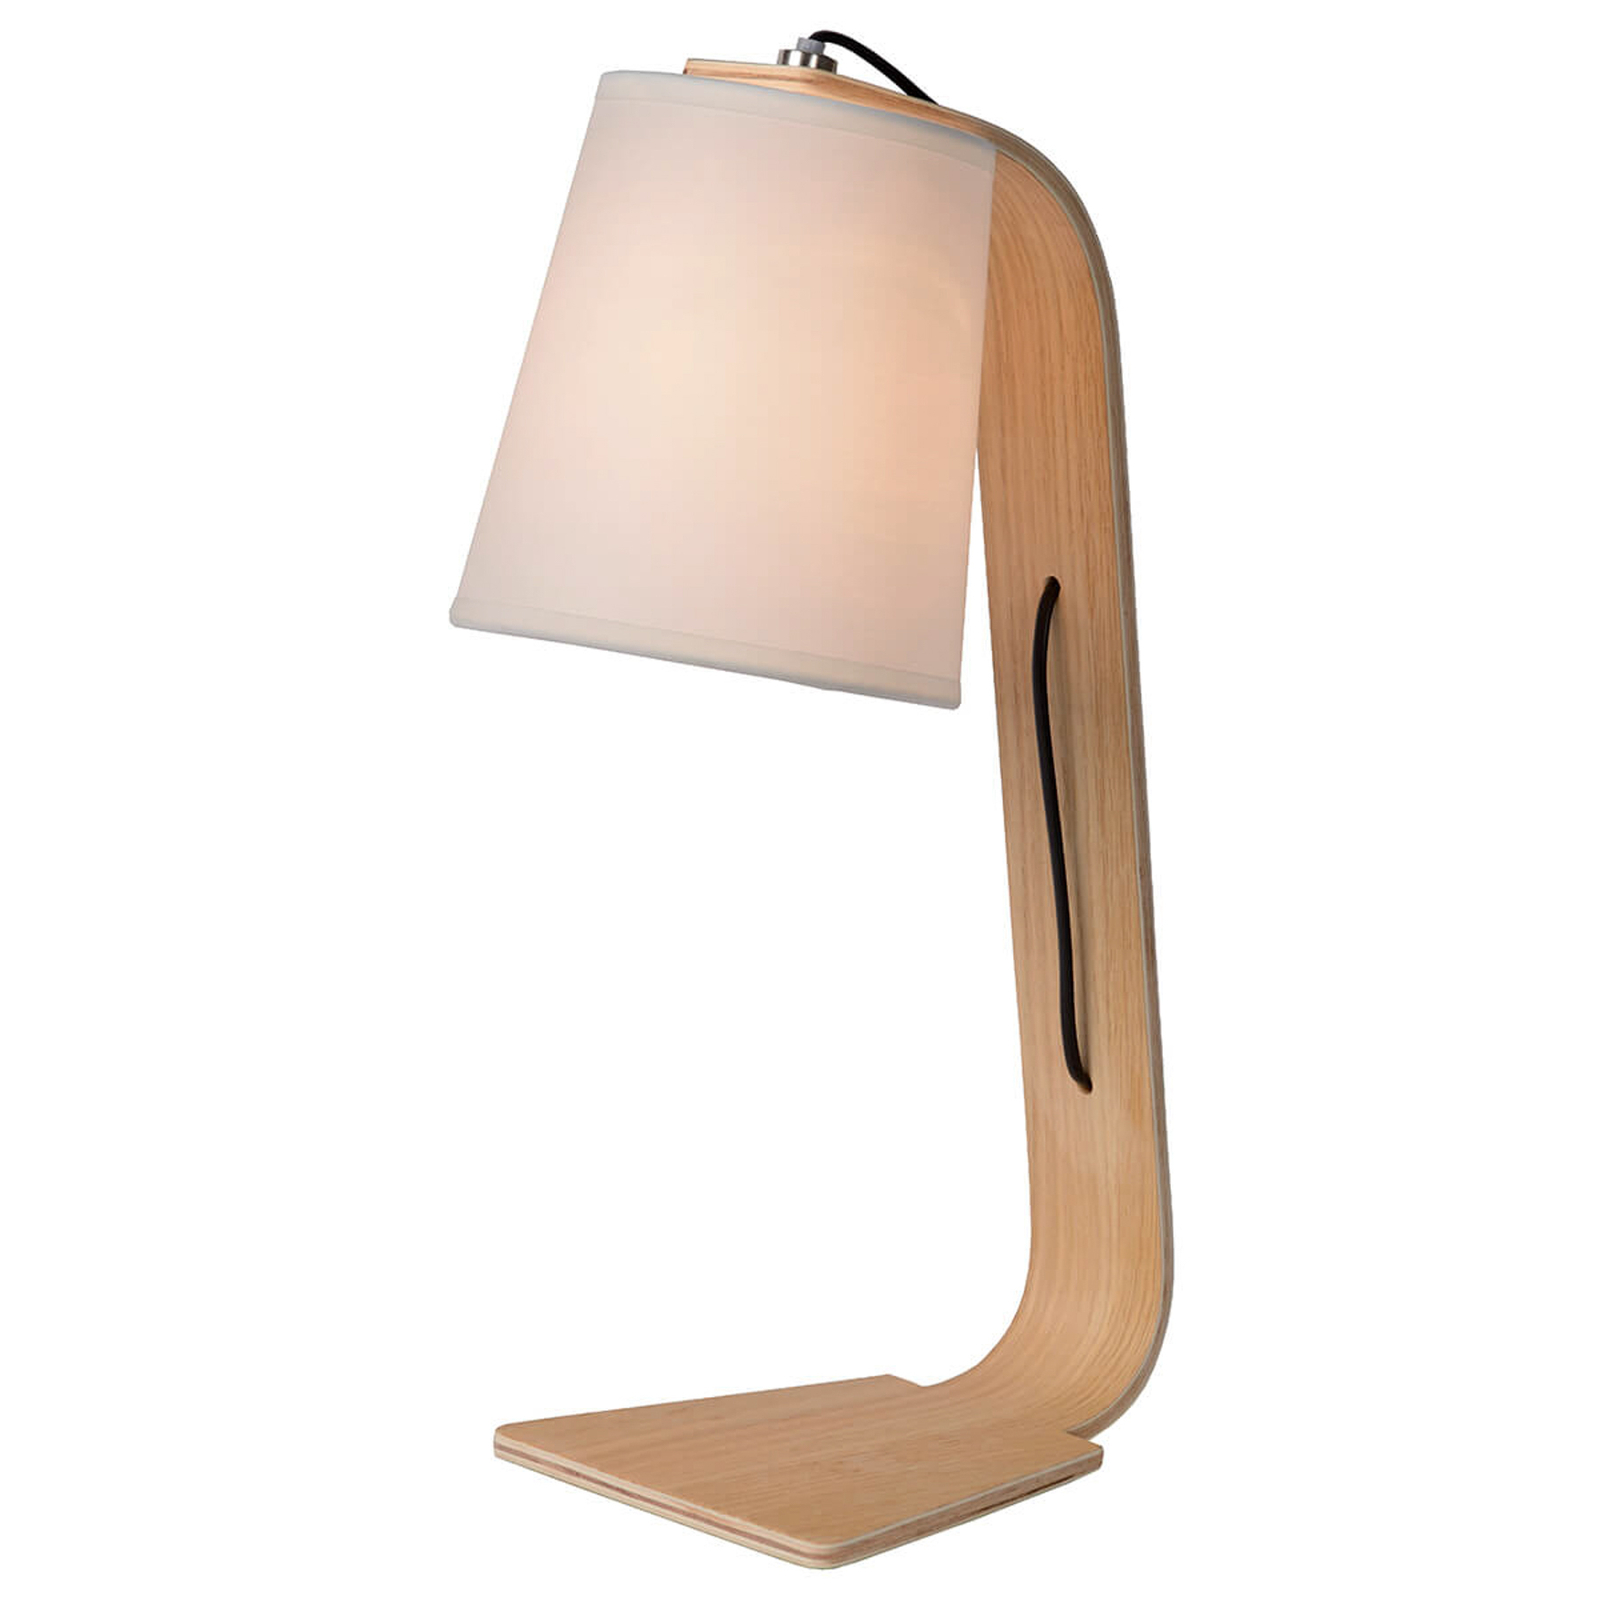 White Nordic wooden table lamp with fabric shade